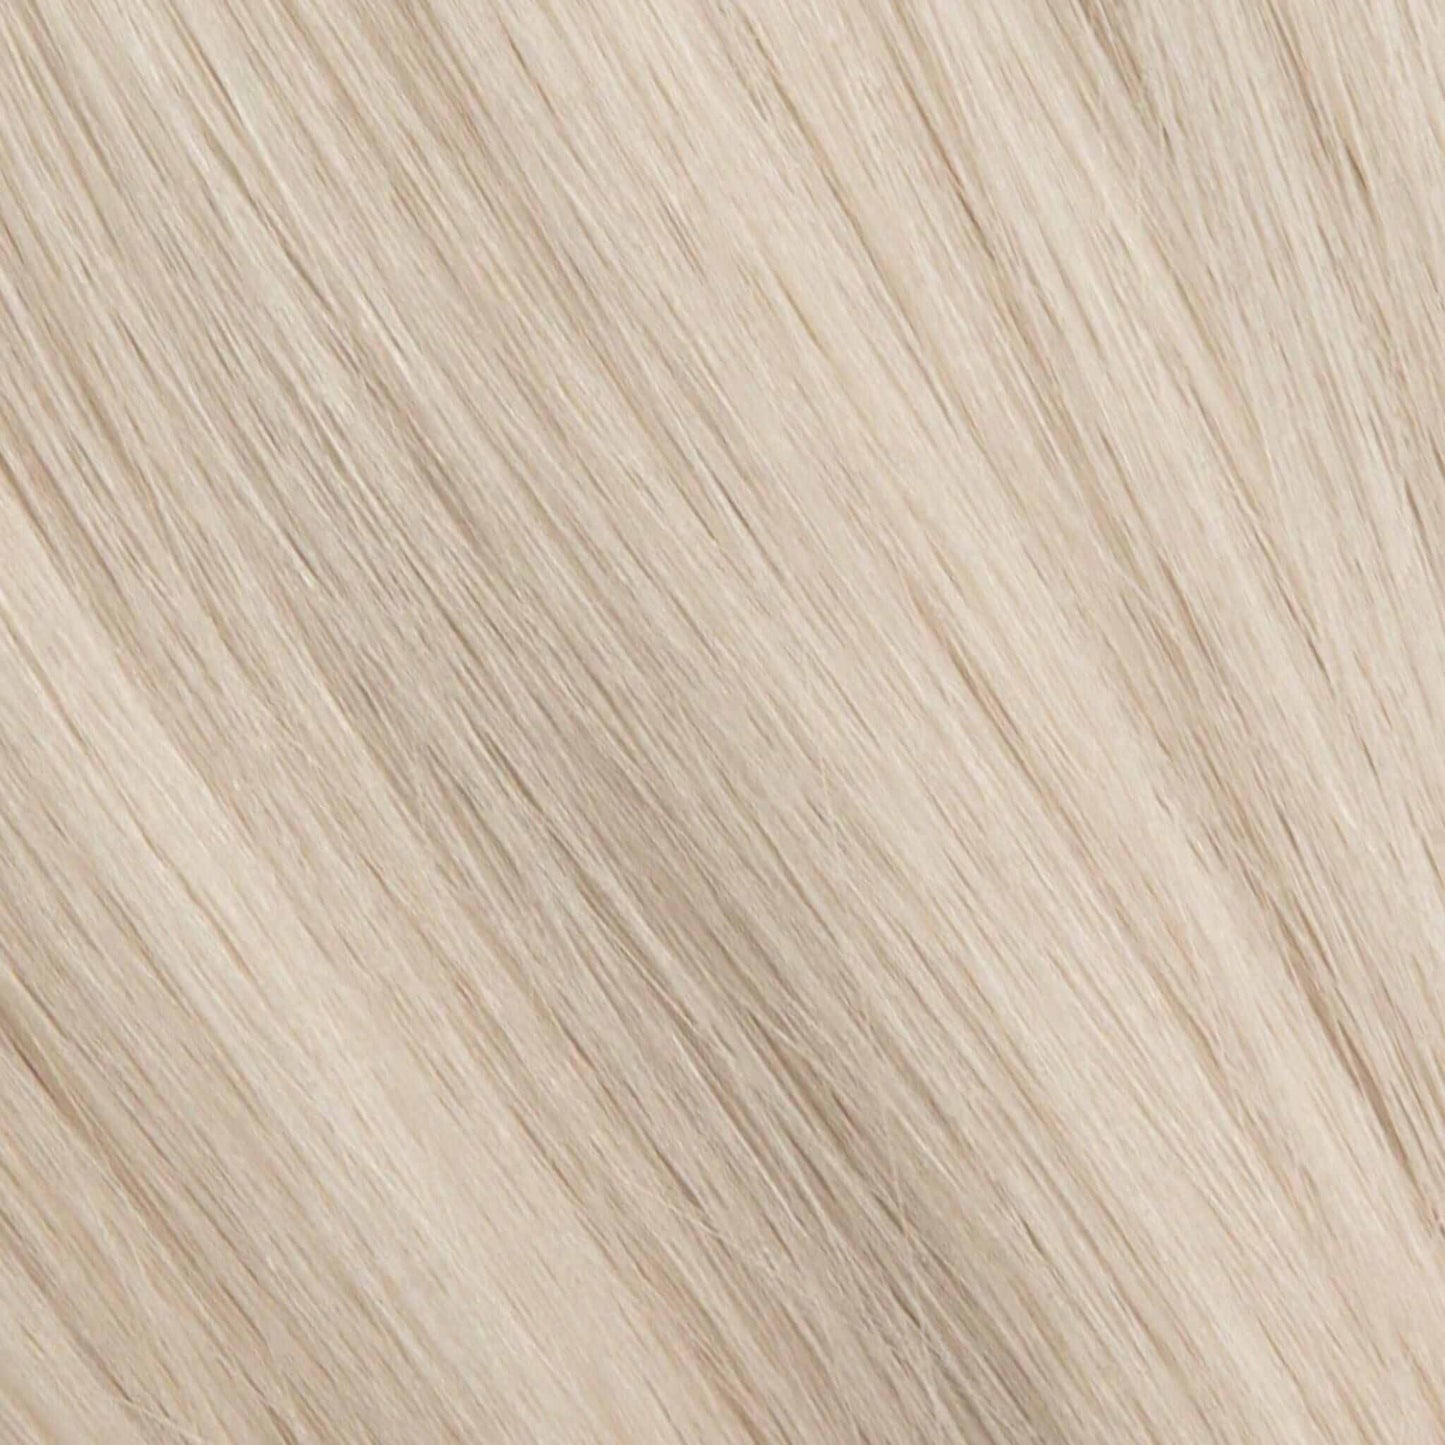 K-Tip 24" 25g Professional Hair Extensions - #80 White Blonde